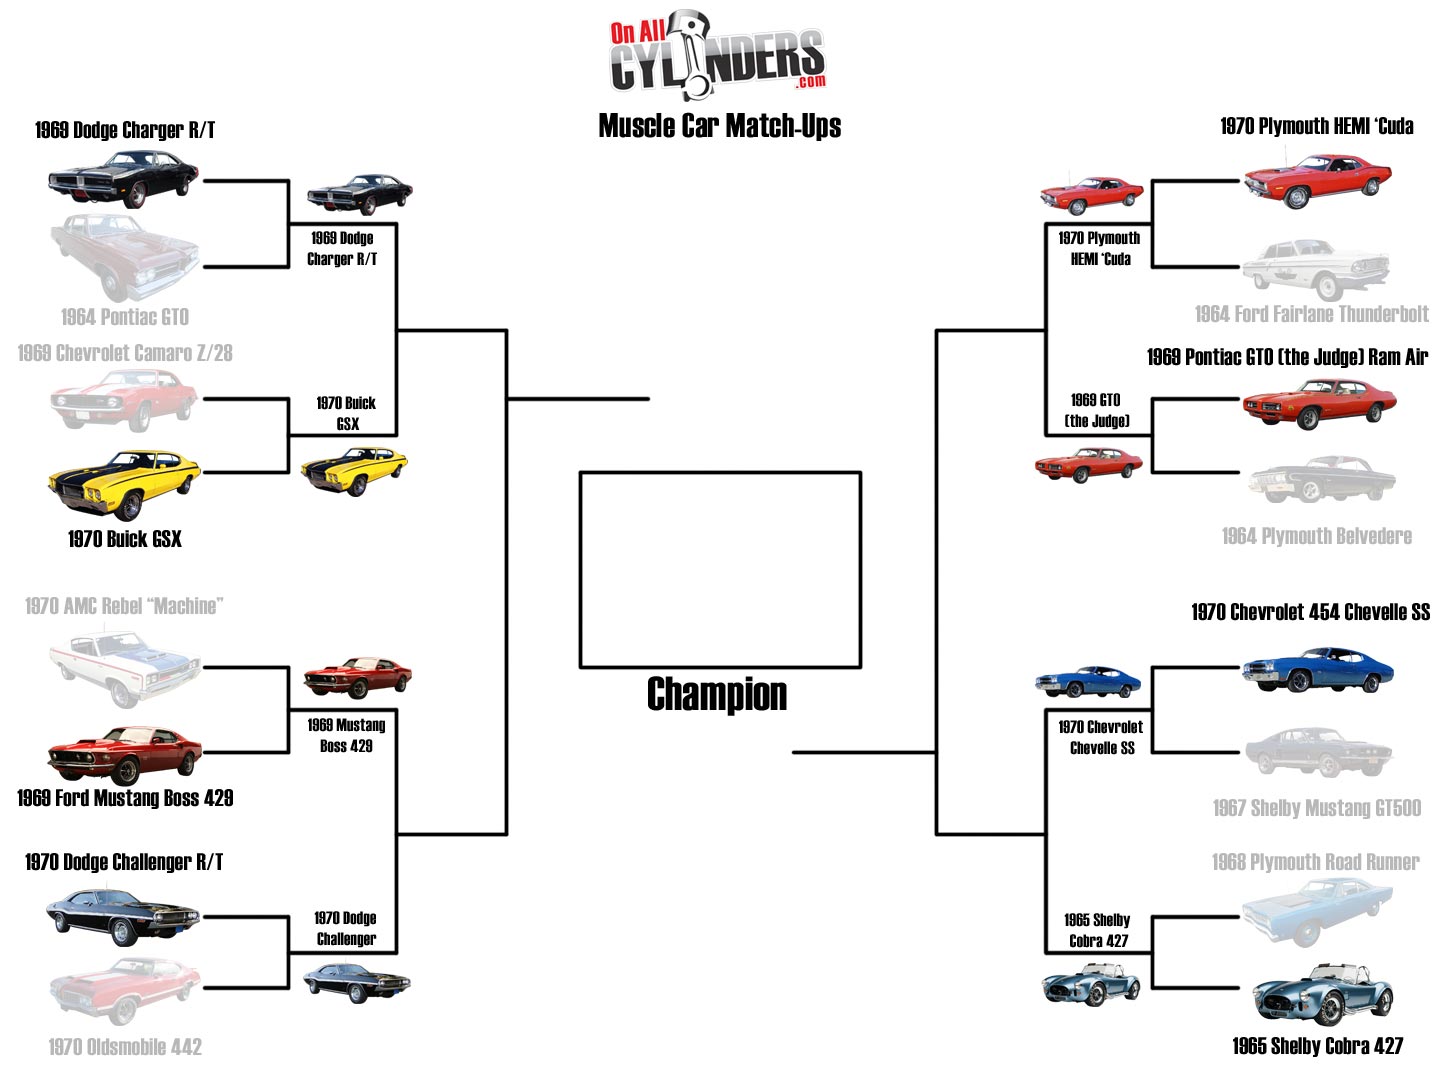 Vote! Muscle Car Match-Ups: Round 2 - OnAllCylinders